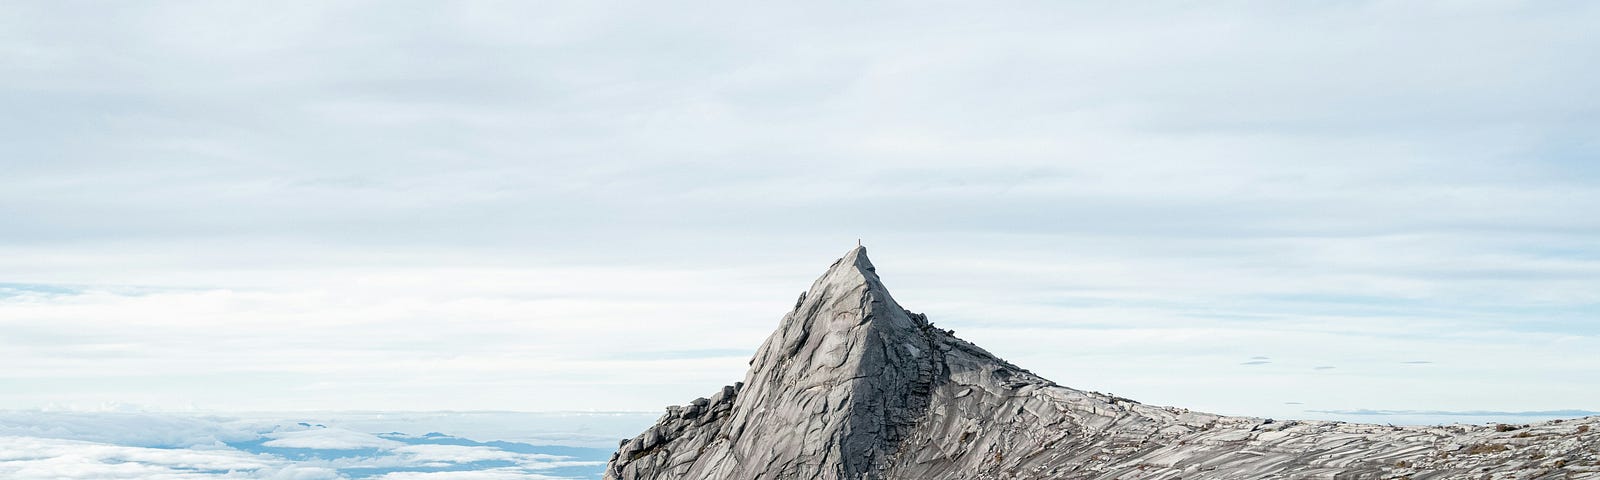 Majestic picture of the summit of Mt Kinabalu, Sabah Malaysia